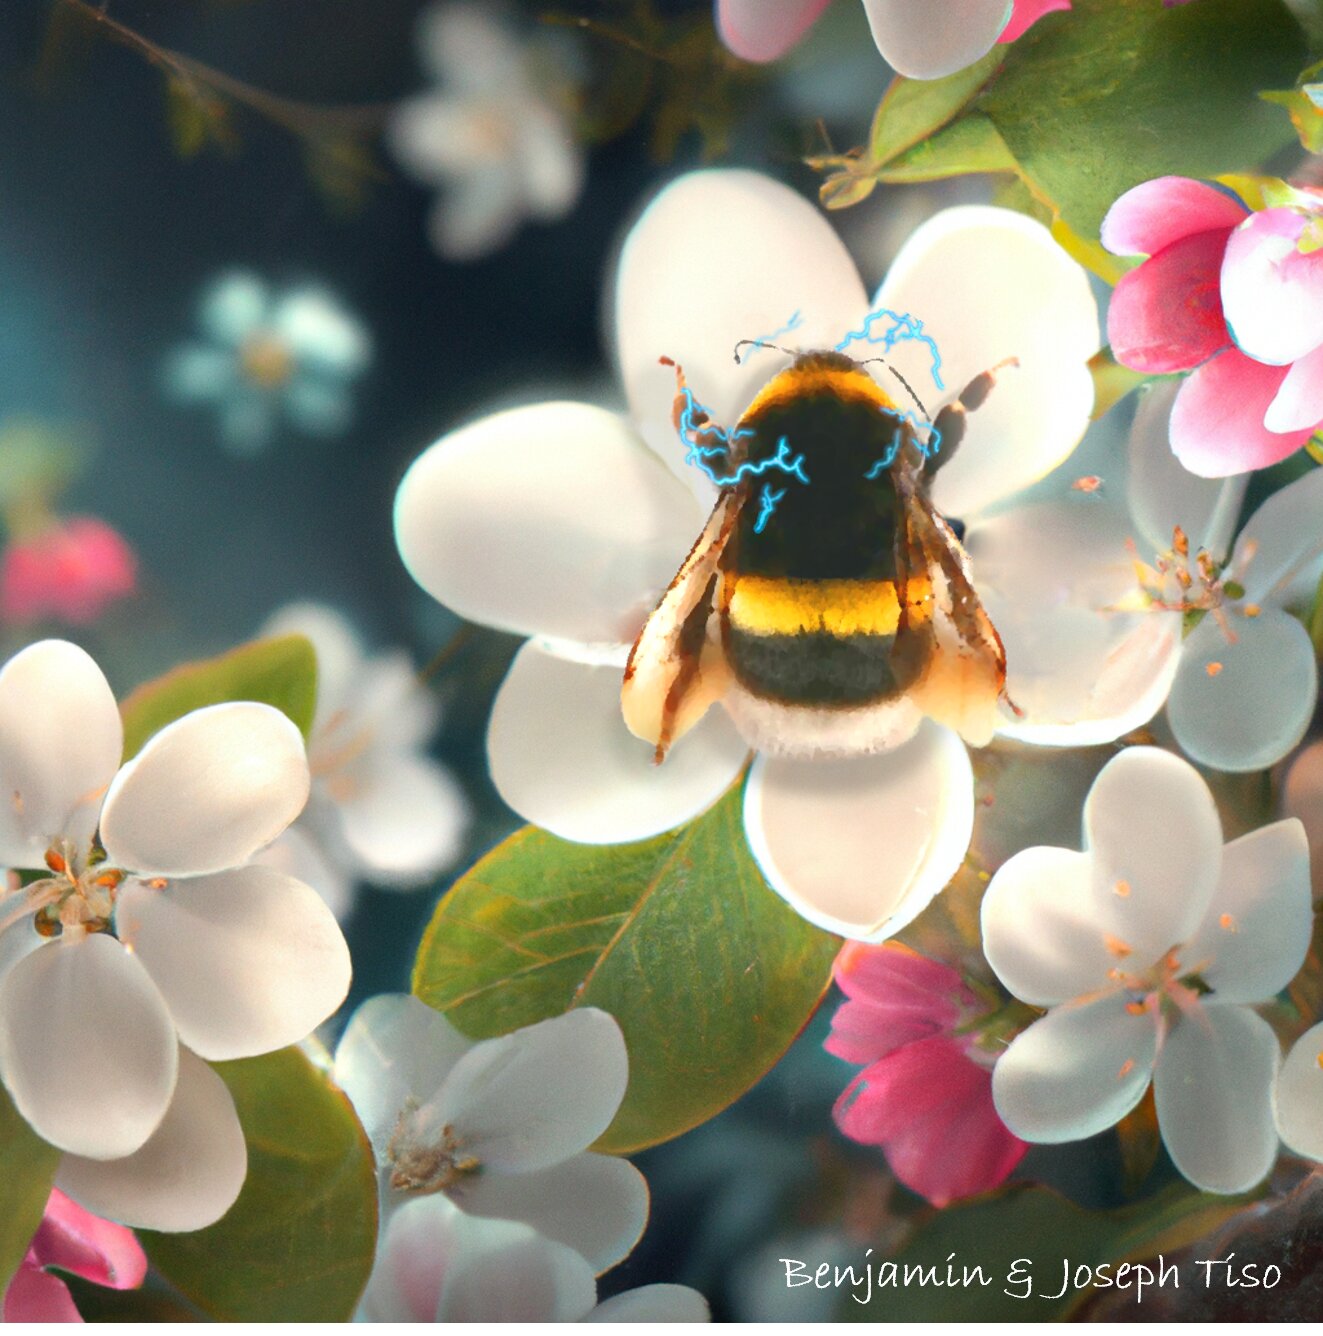 Fertilizers limit pollination by changing how bumblebees sense flowers